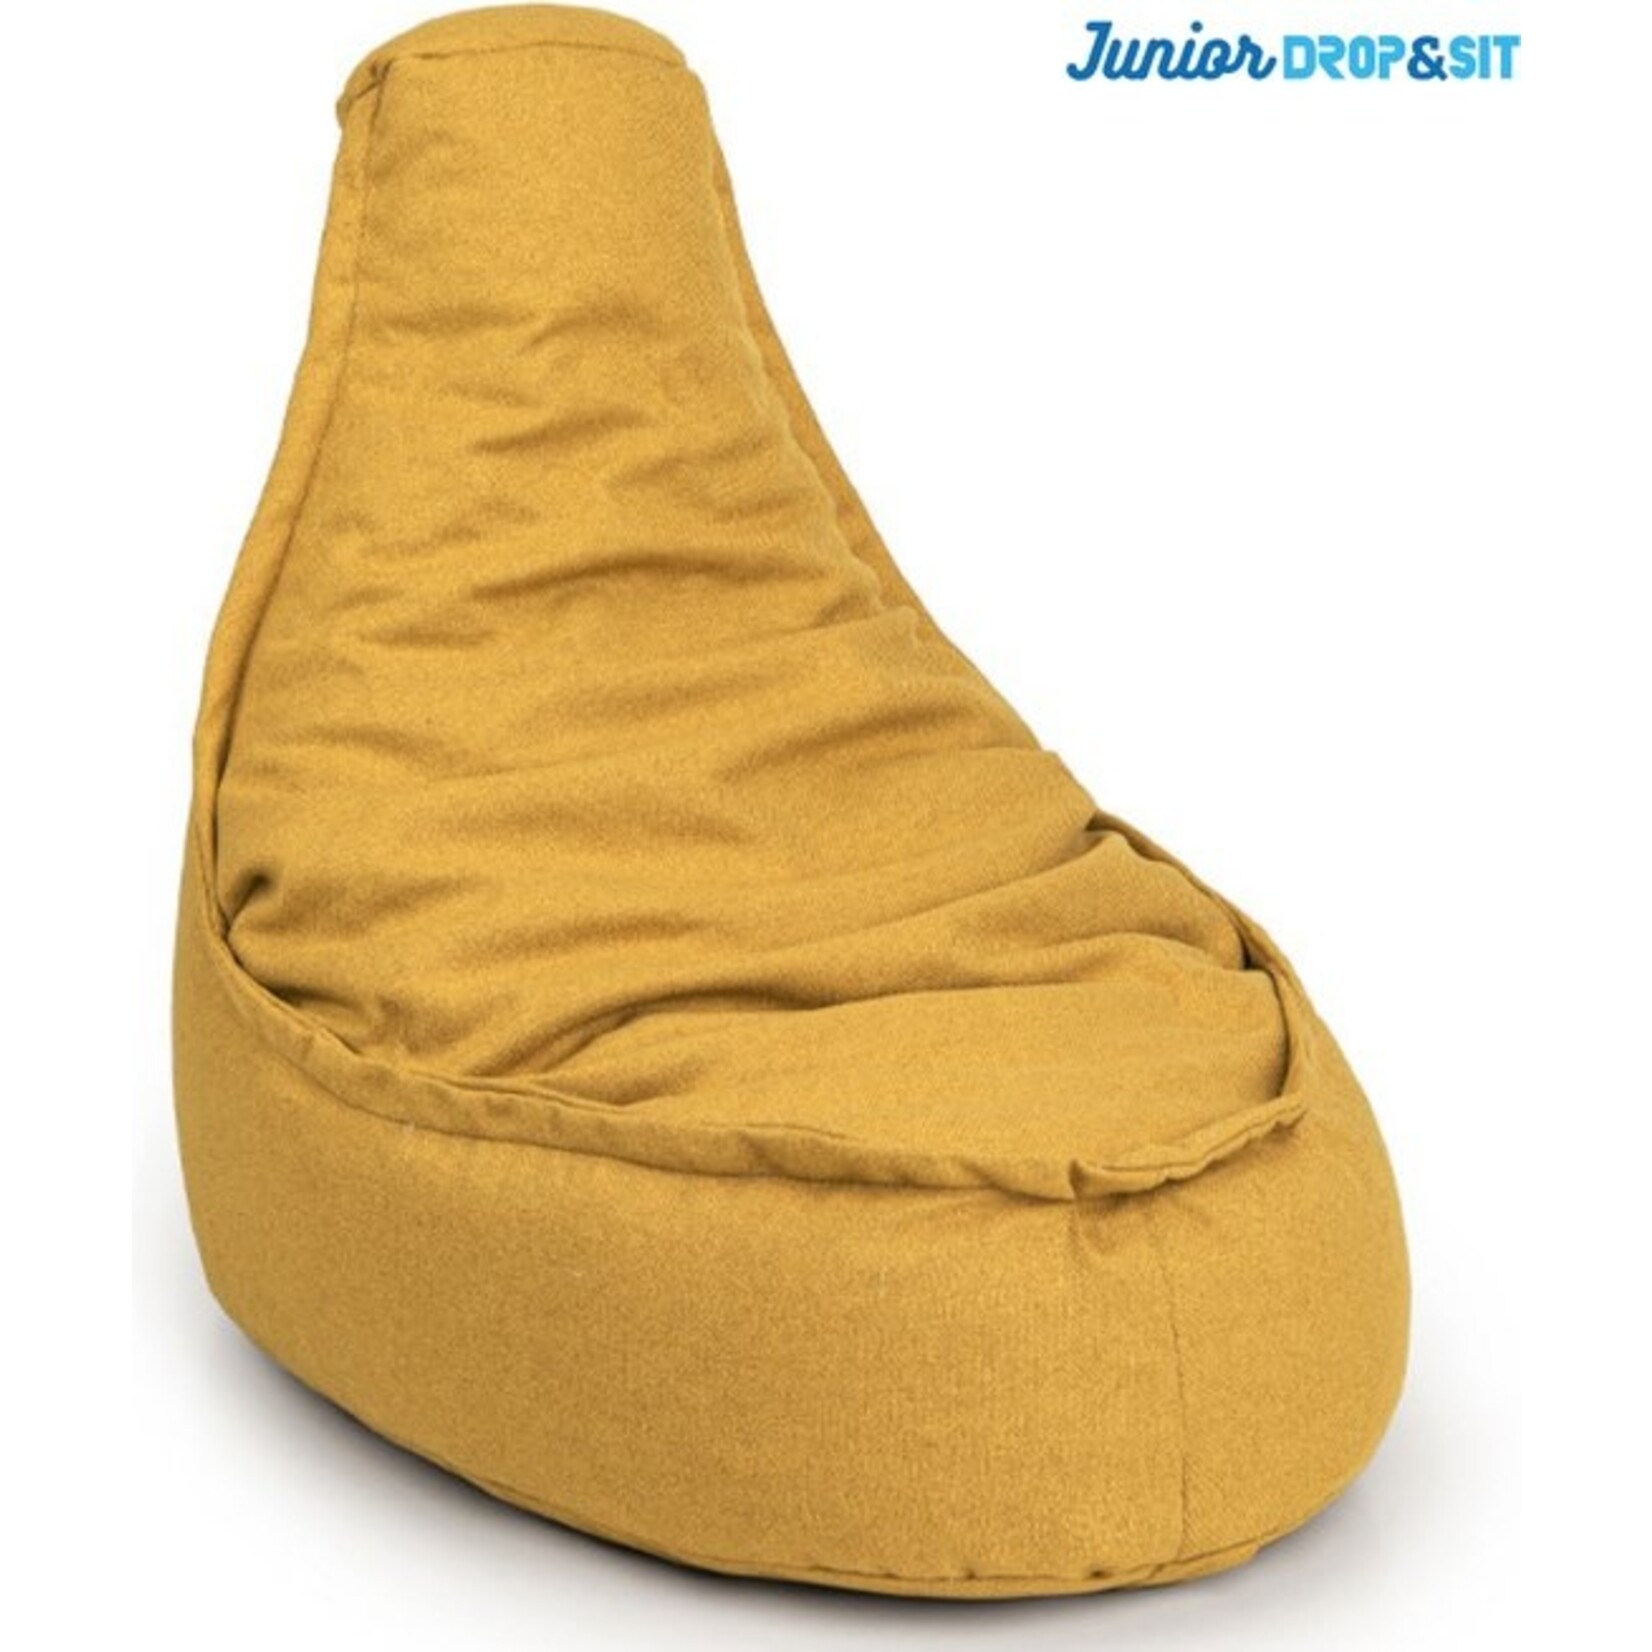 Drop & Sit - Beanbag Chair Durable - 100% Recycled PET Bottles - Yellow - Junior - For indoor and outdoor use